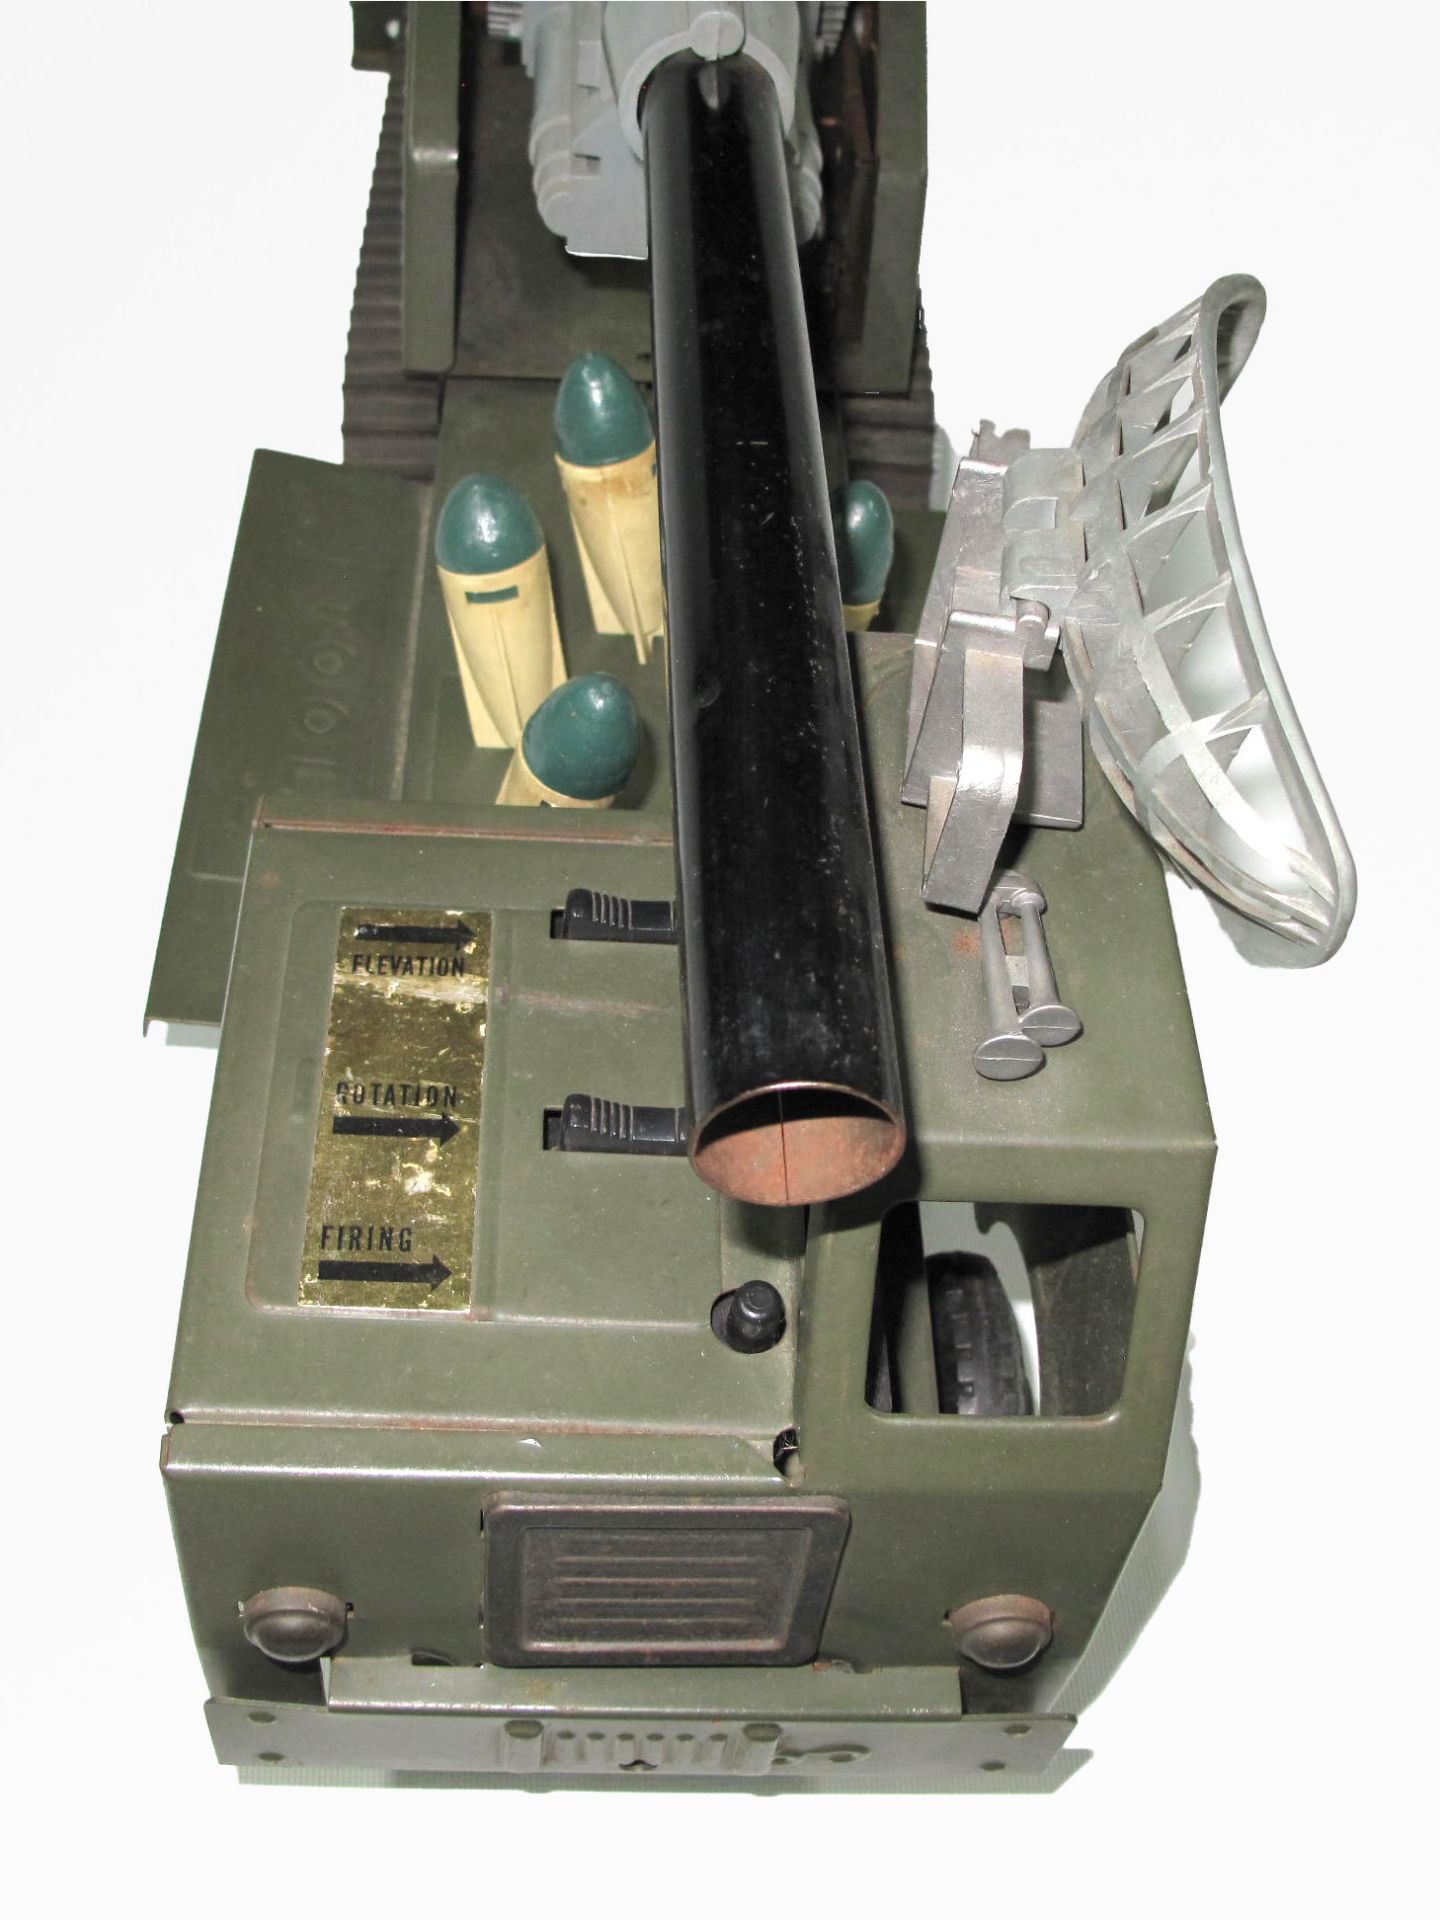 Primers Tools - Rocket launcher, 1940 - Image 4 of 4